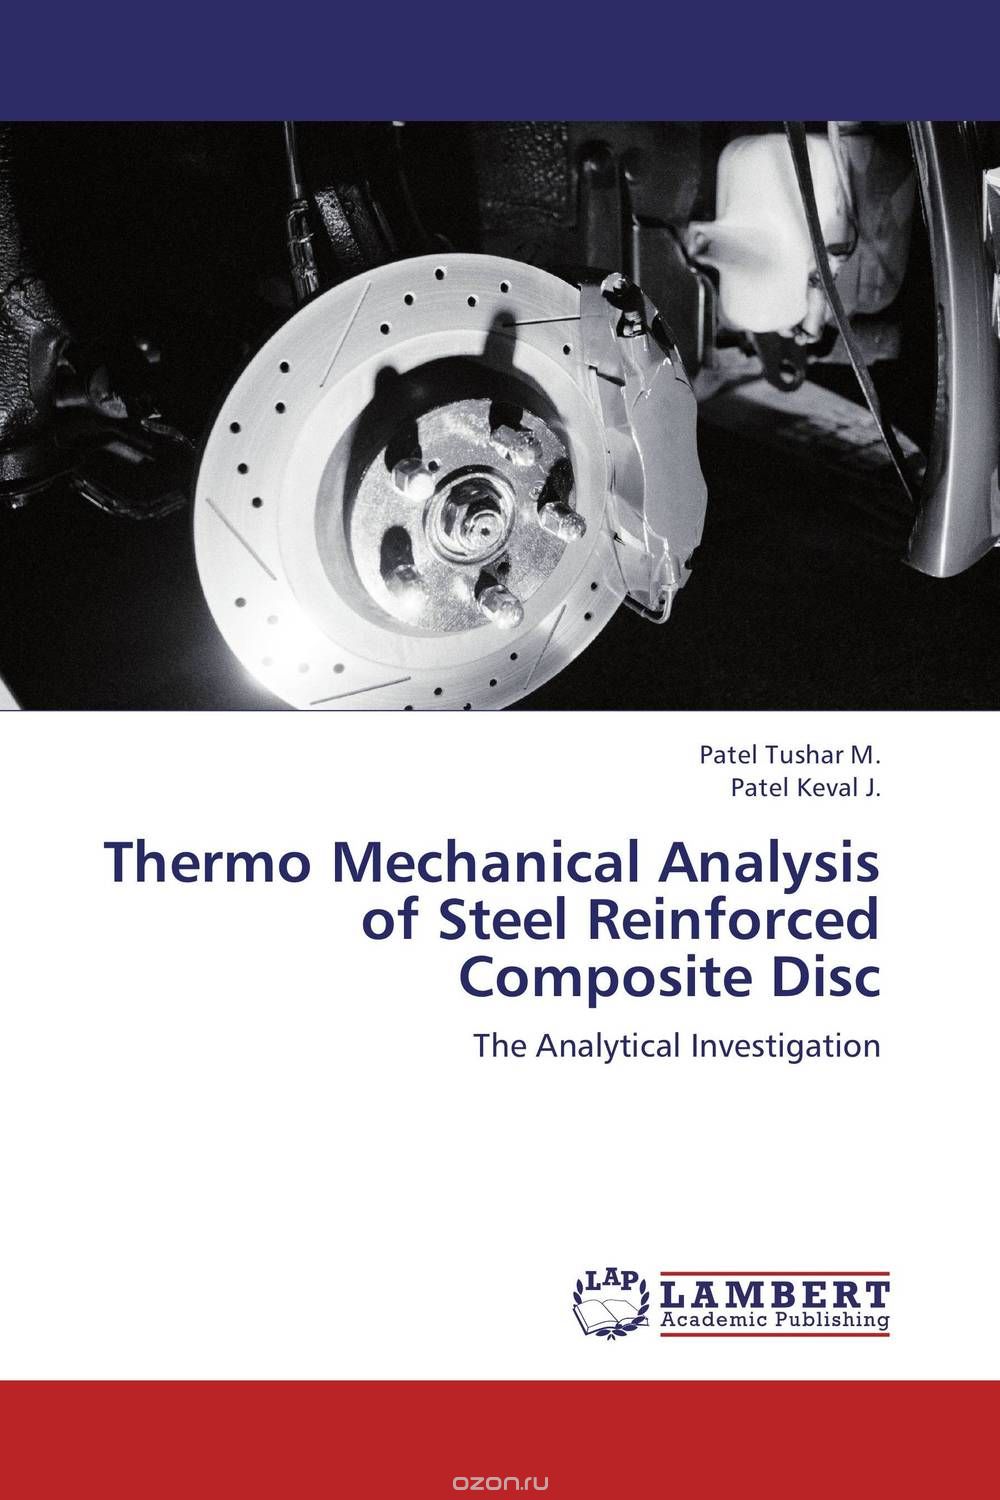 Thermo Mechanical Analysis of Steel Reinforced Composite Disc